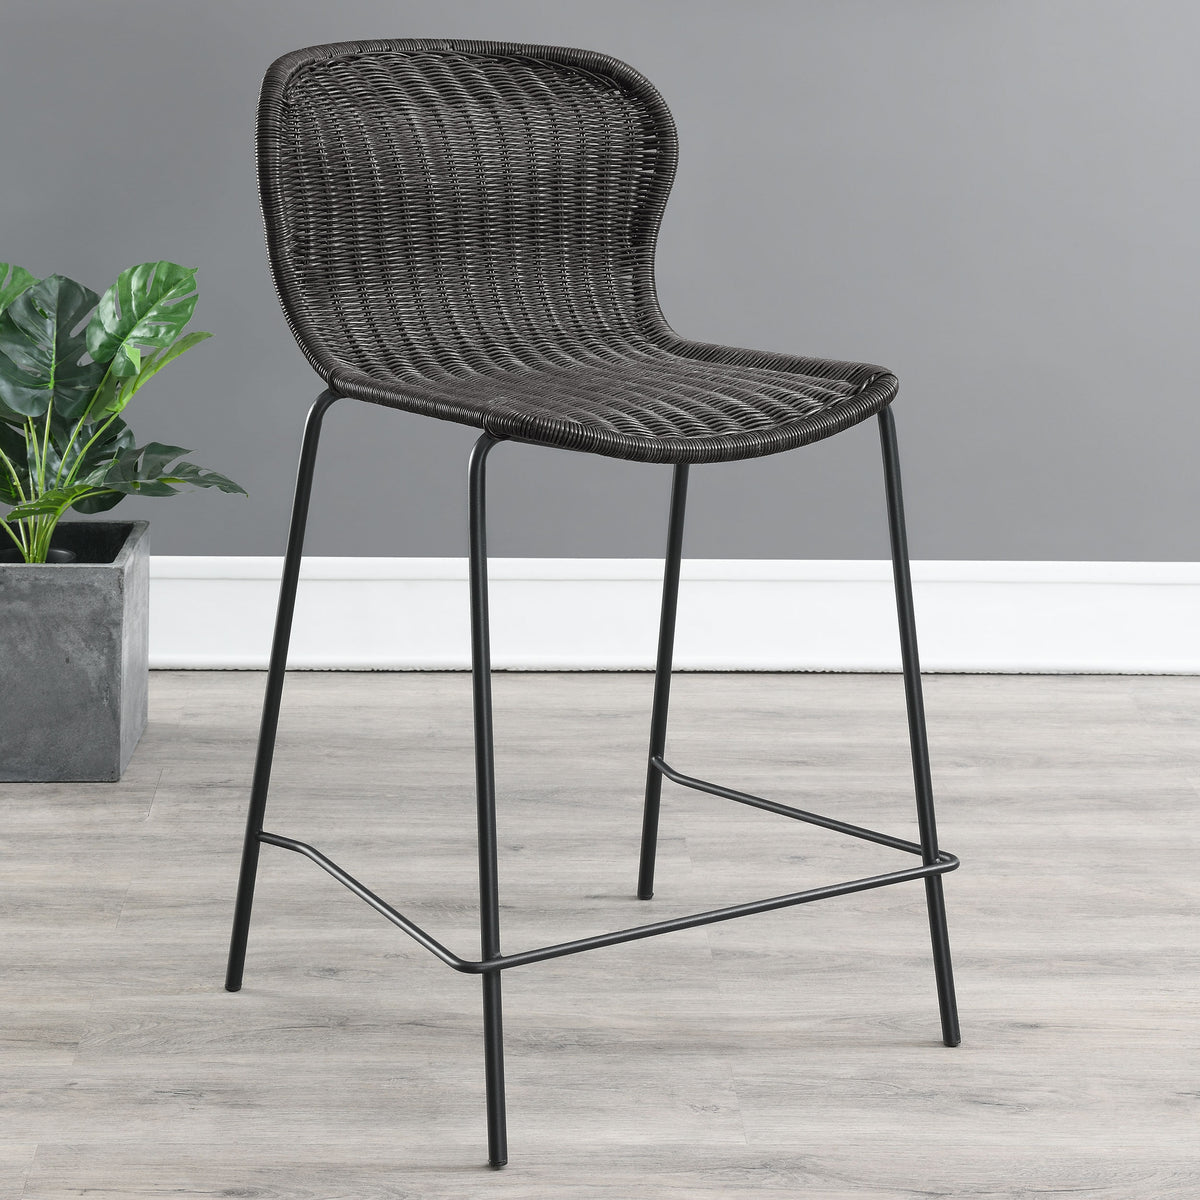 Mckinley Upholstered Counter Height Stools with Footrest (Set of 2) Brown and Sandy Black Mckinley Upholstered Counter Height Stools with Footrest (Set of 2) Brown and Sandy Black Half Price Furniture